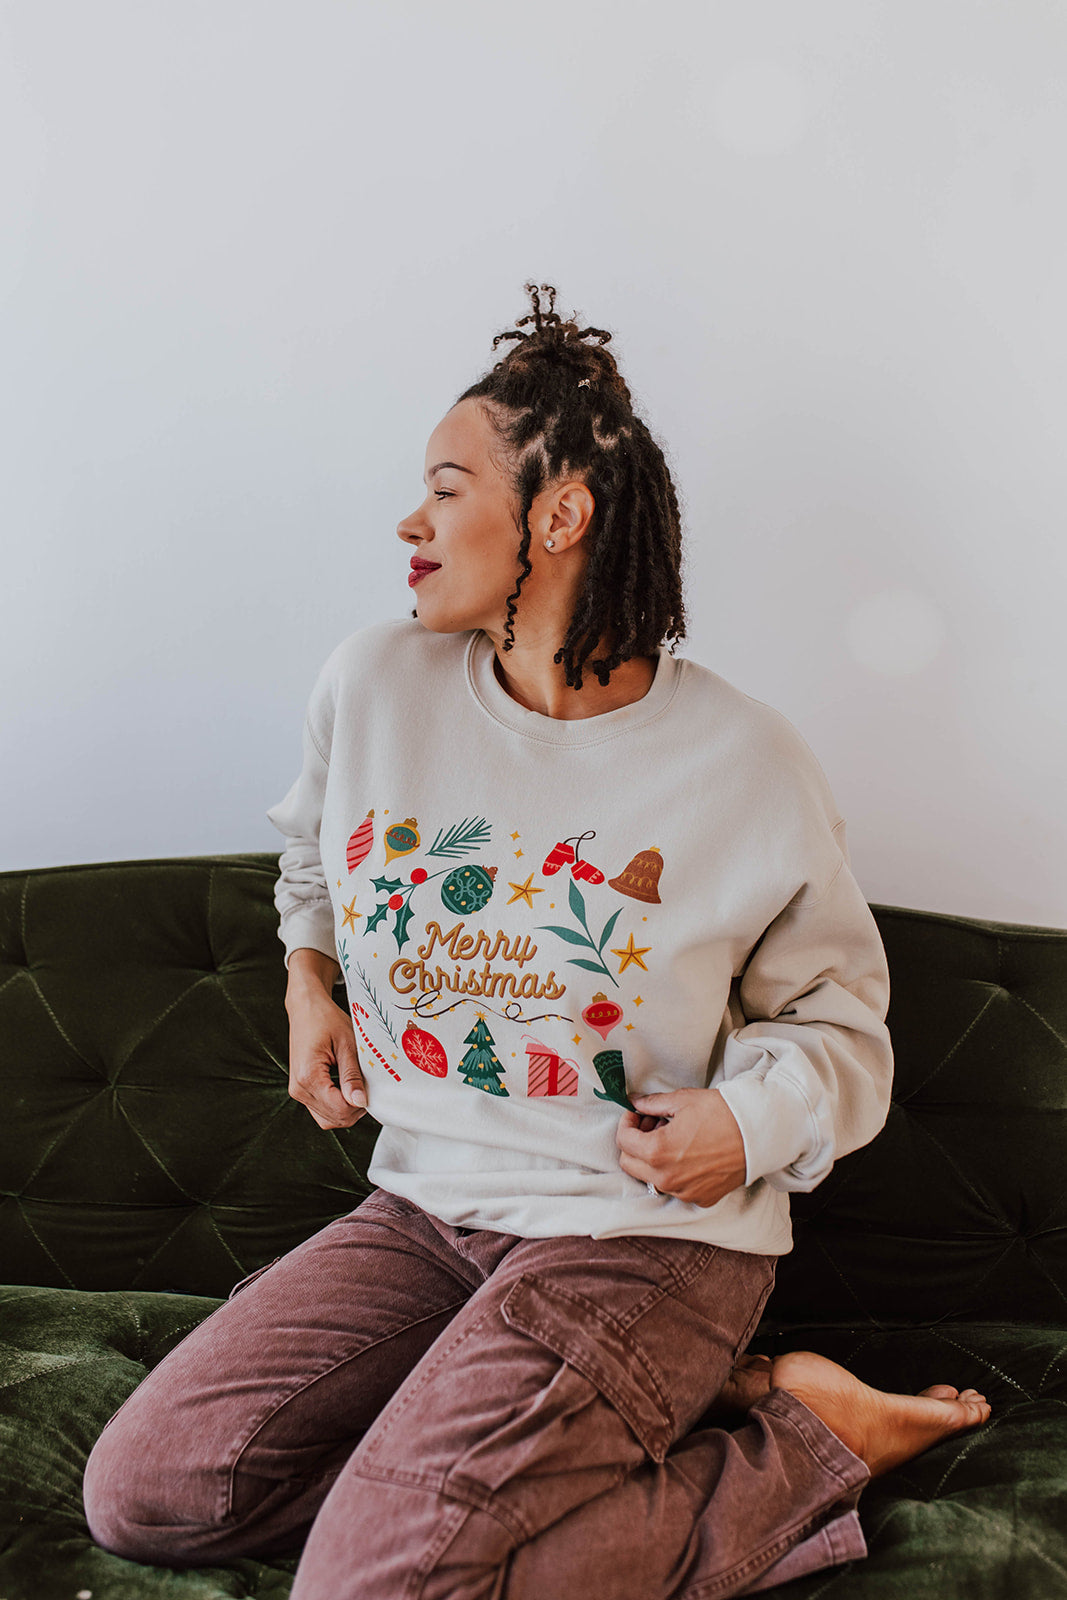 THE NOSTALGIC MERRY CHRISTMAS PULLOVER IN SAND BY PINK DESERT